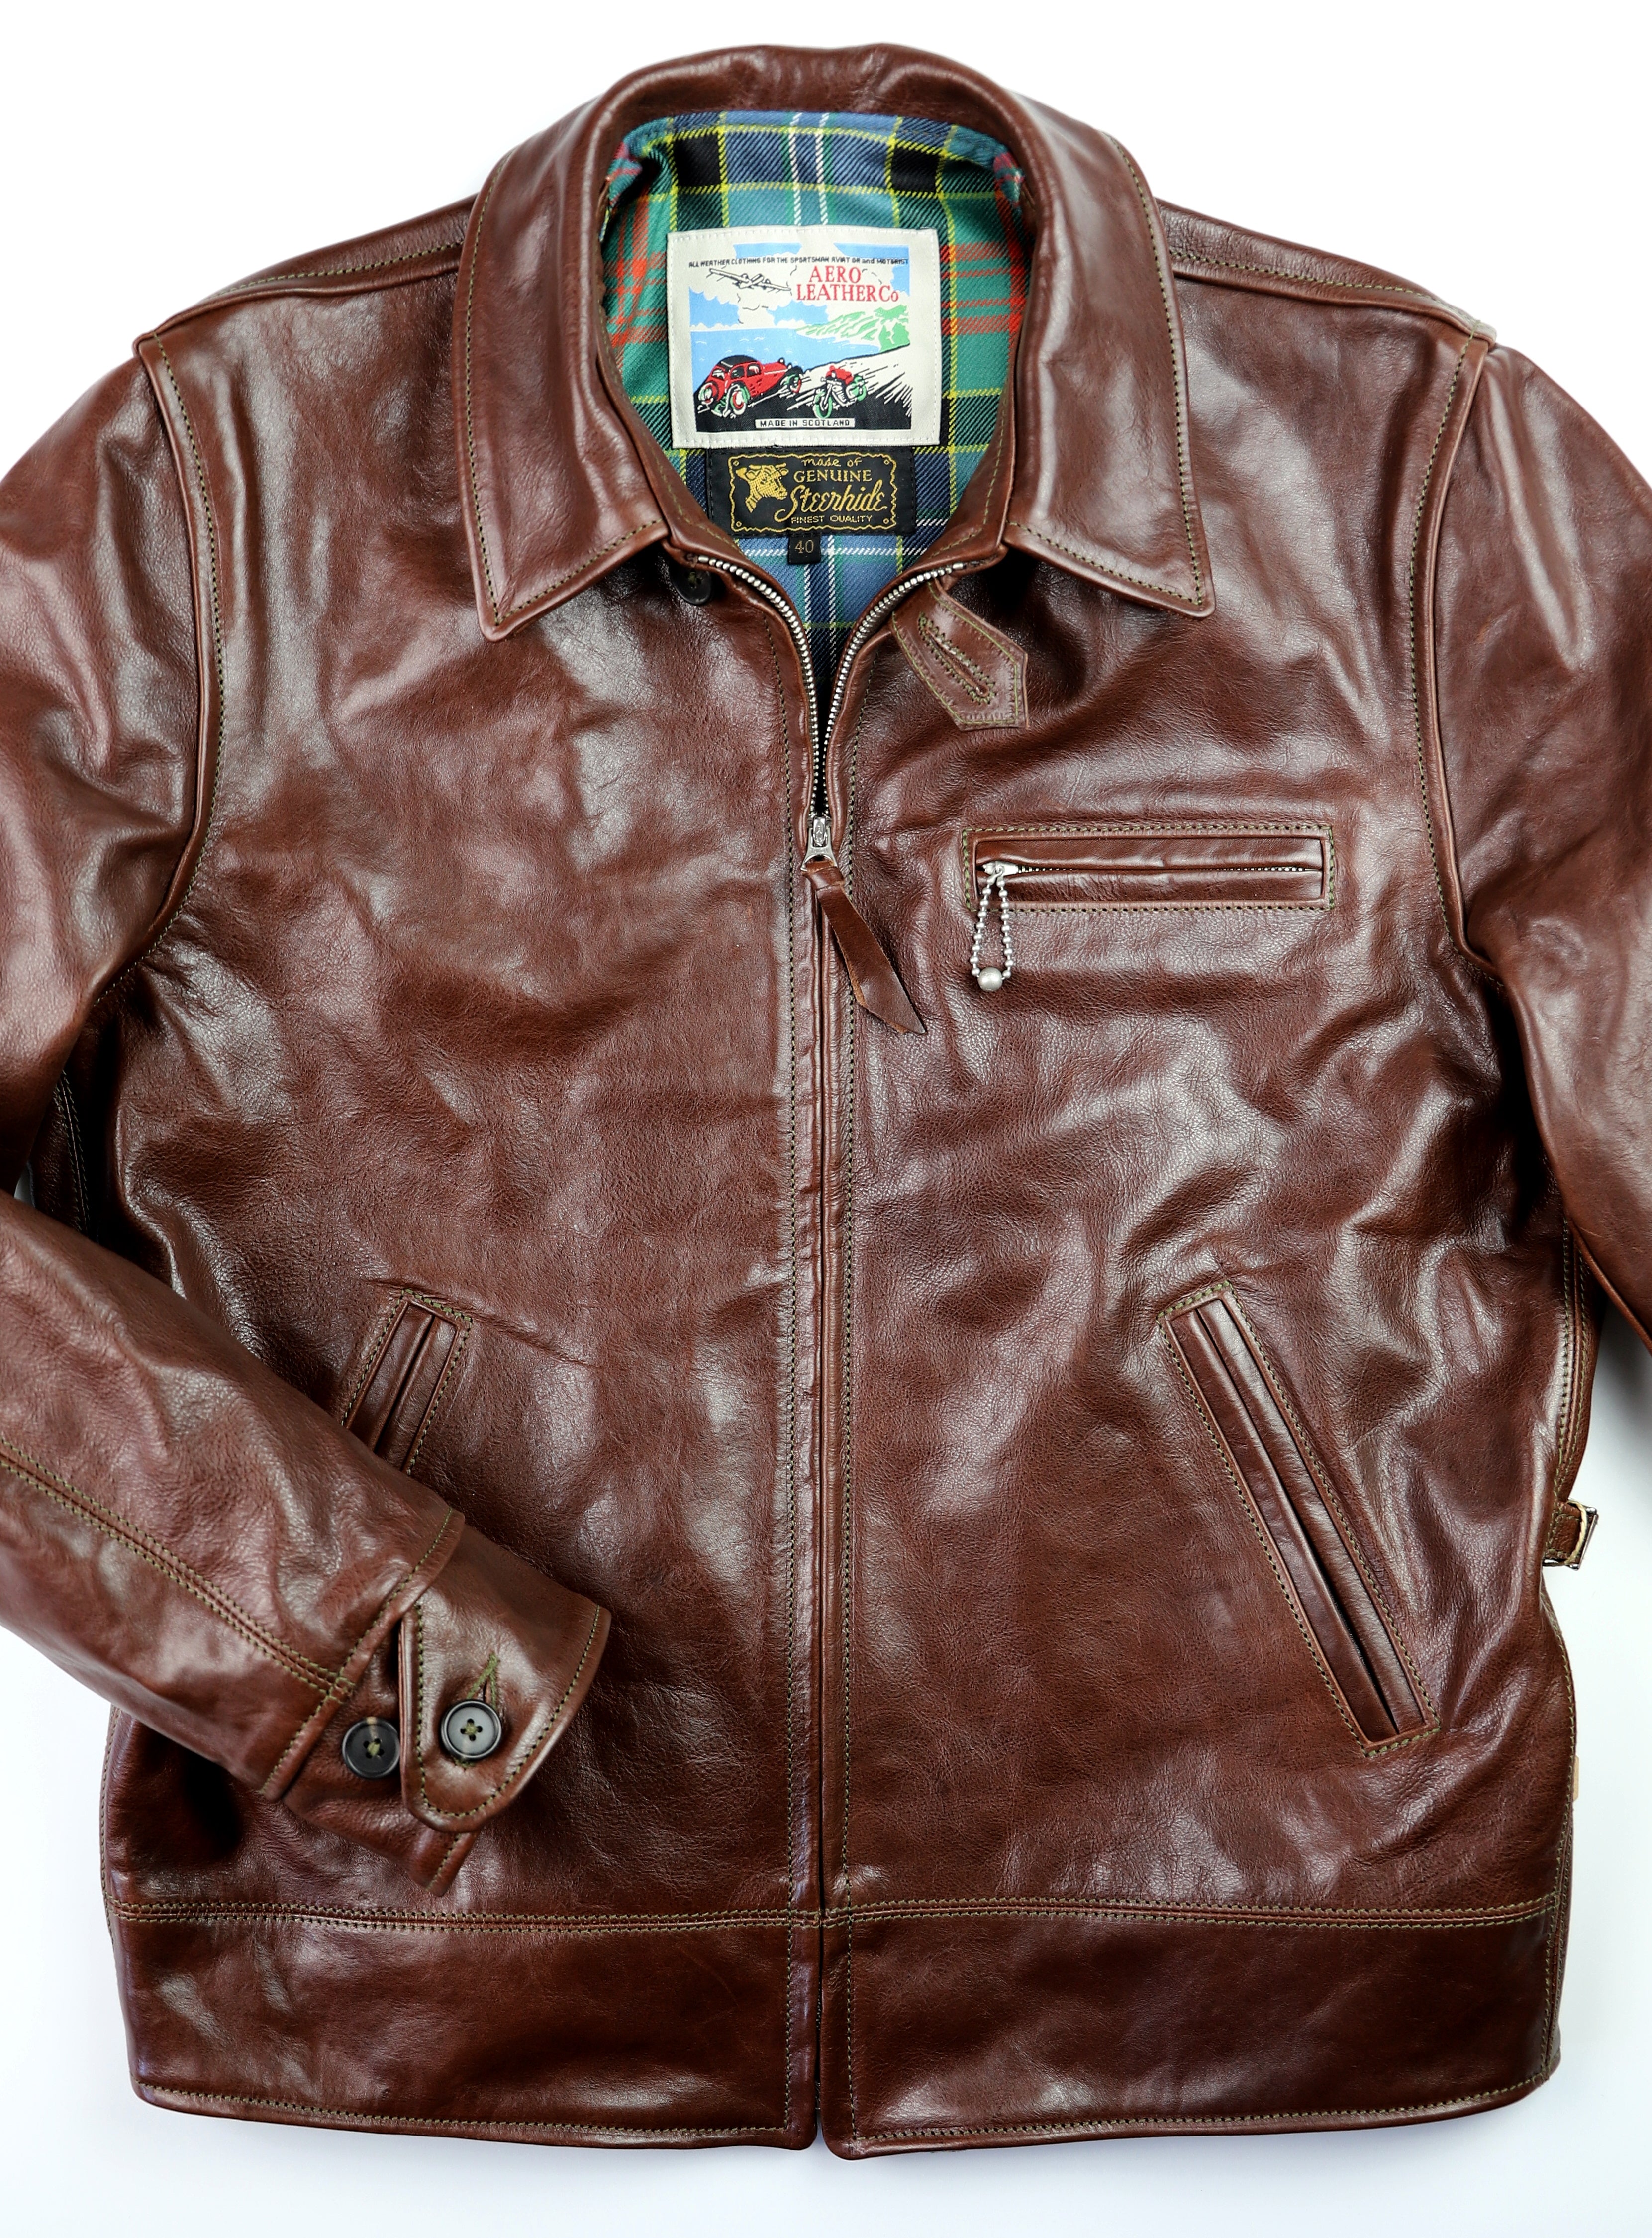 Leather jacket with straight front zipper, three front pockets, button cuffs and shirt collar.